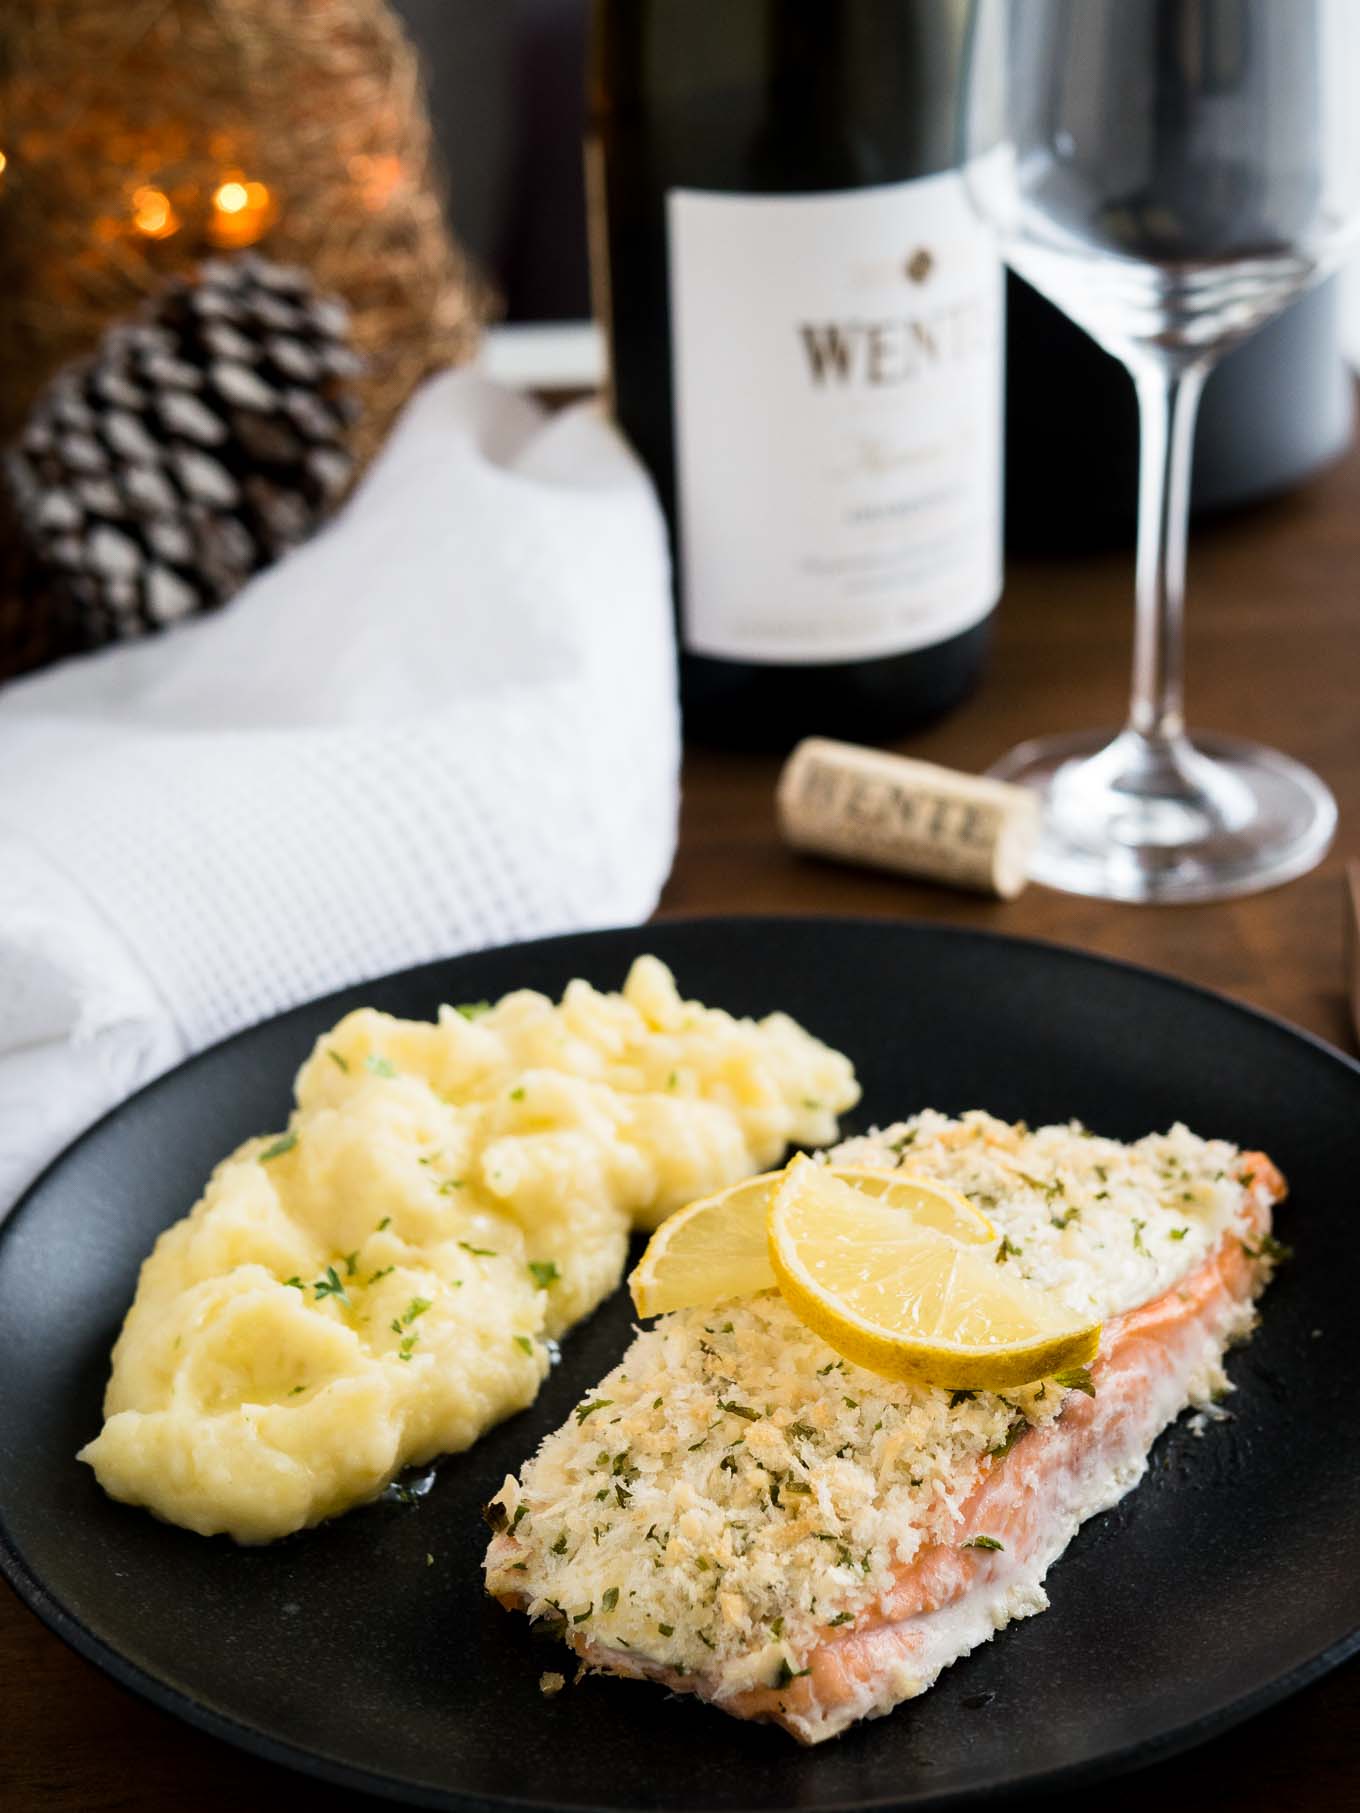 This Horseradish Parmesan crusted Salmon is baked in the oven and only takes 20 minutes to make. A dinner fancy enough for guests but also easy enough for weeknights!